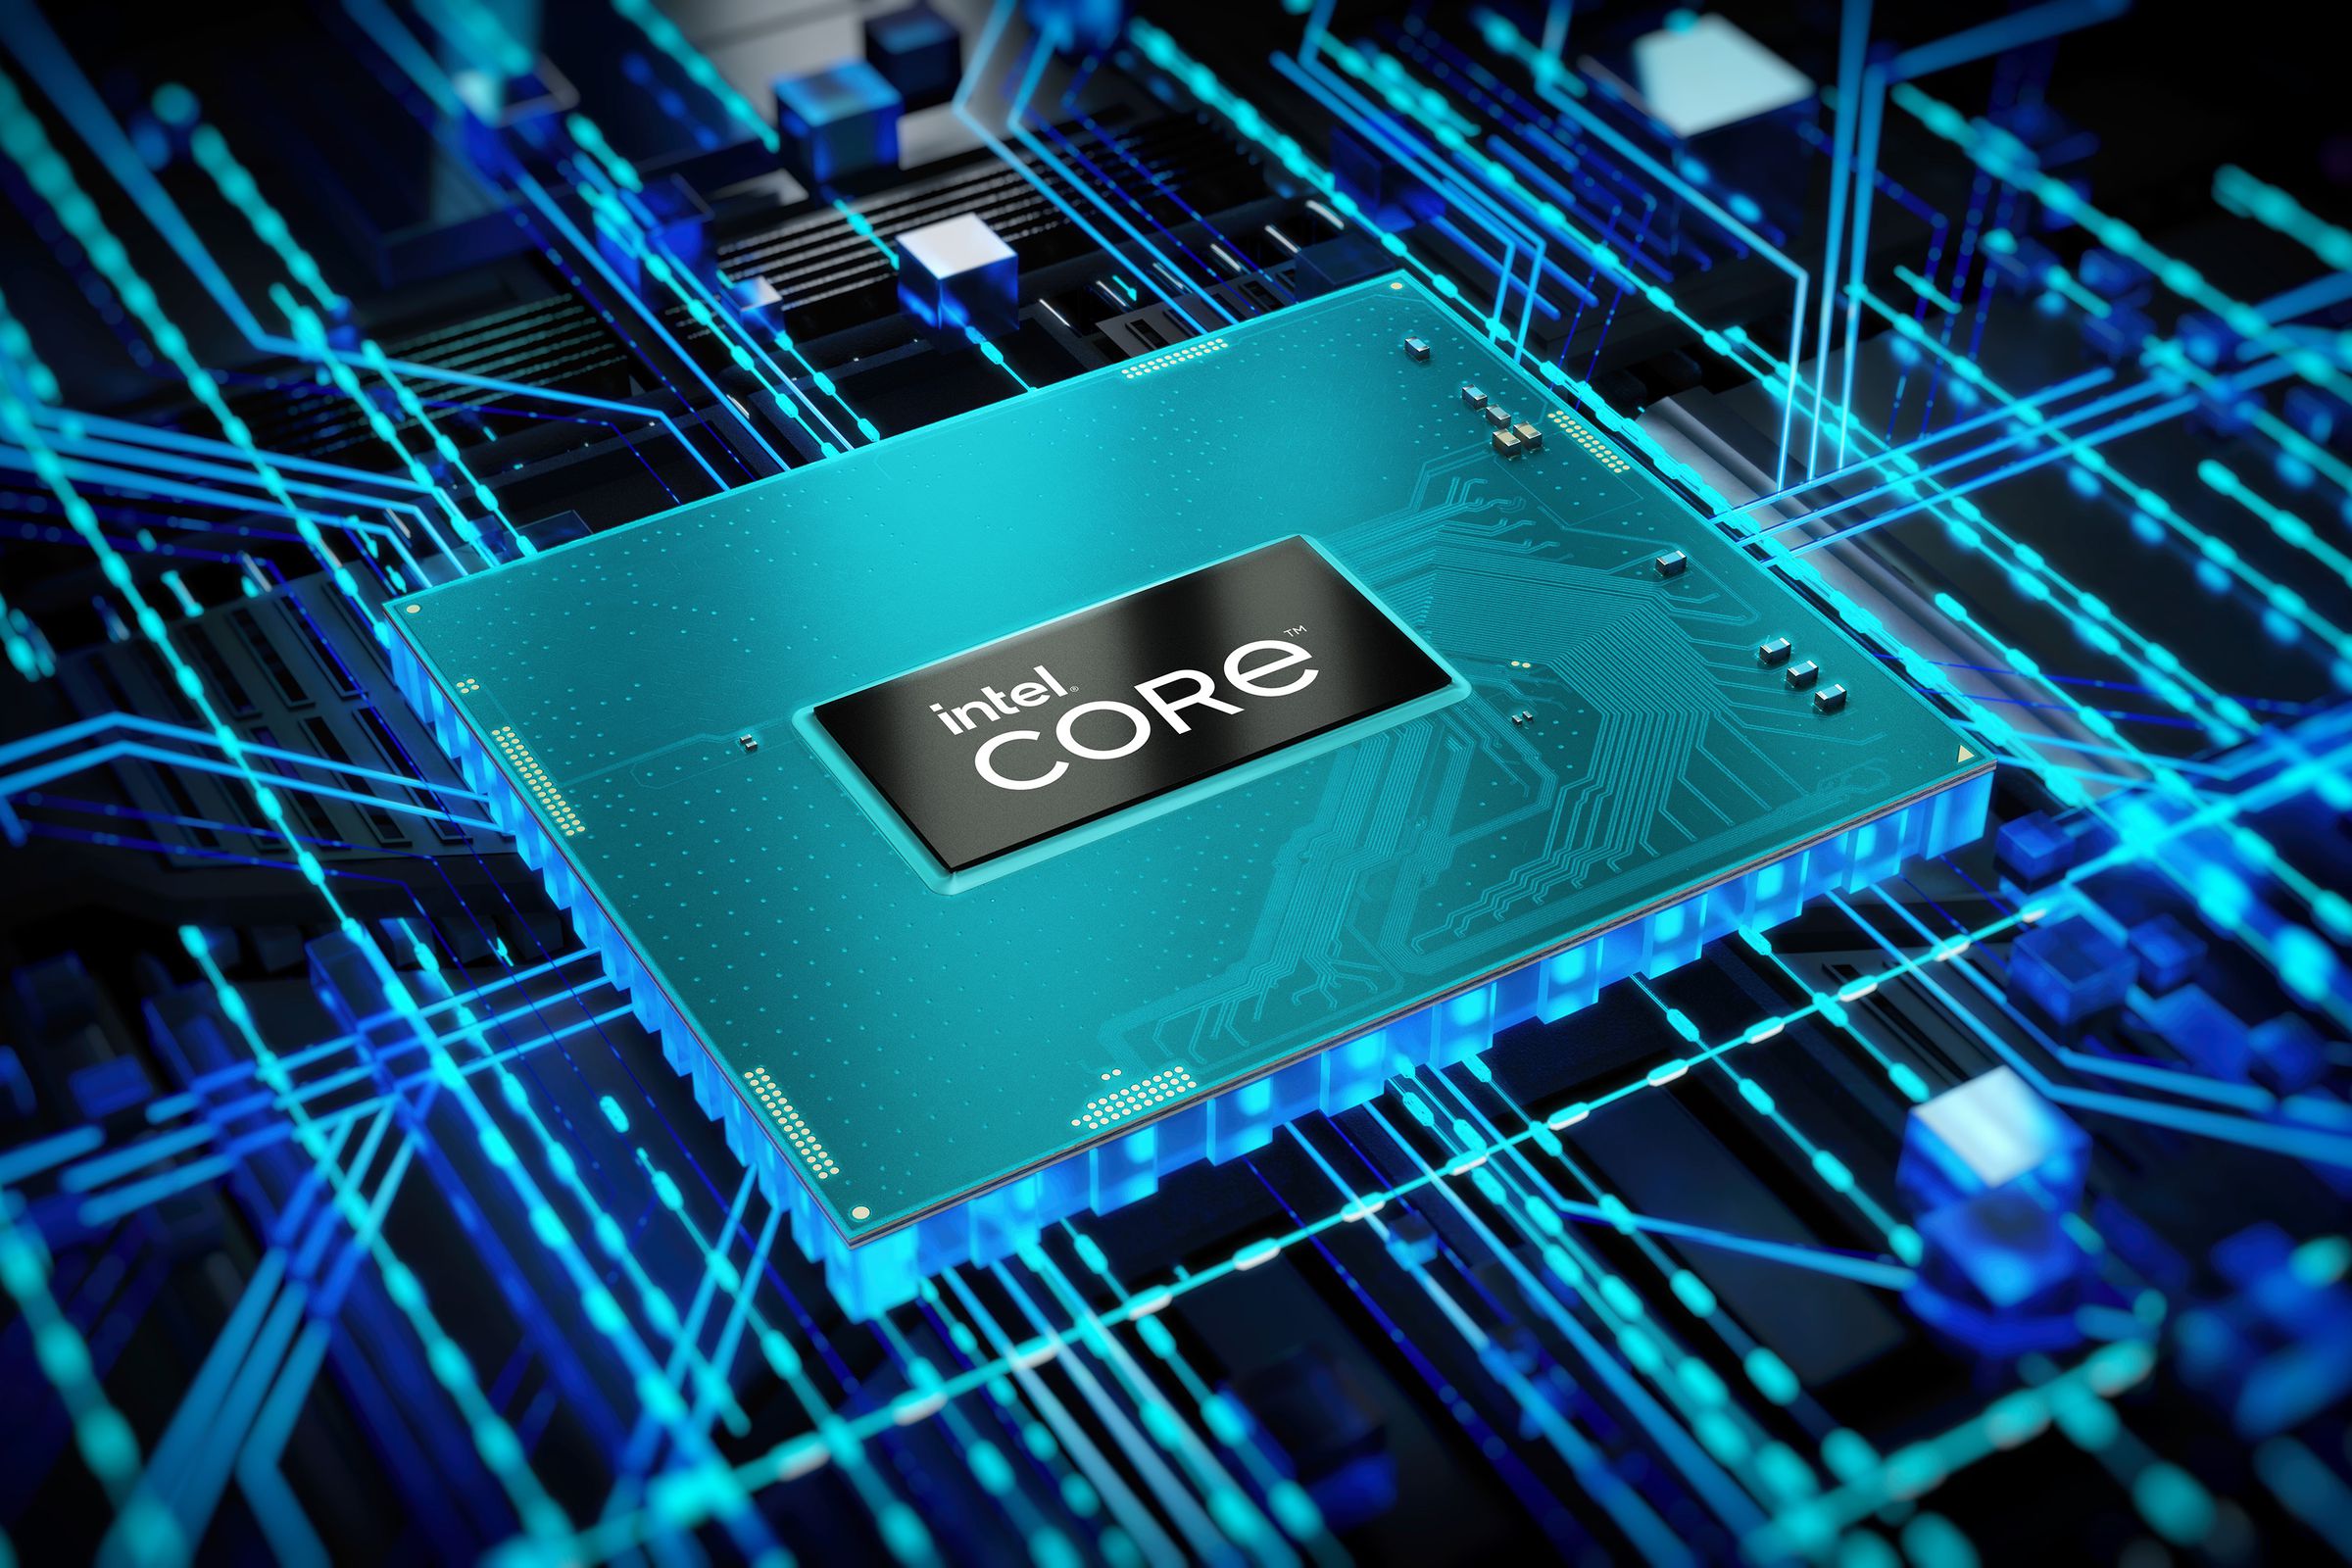 A mobile processor that reads “Intel Core” on a background of illuminated blue and green nodes.